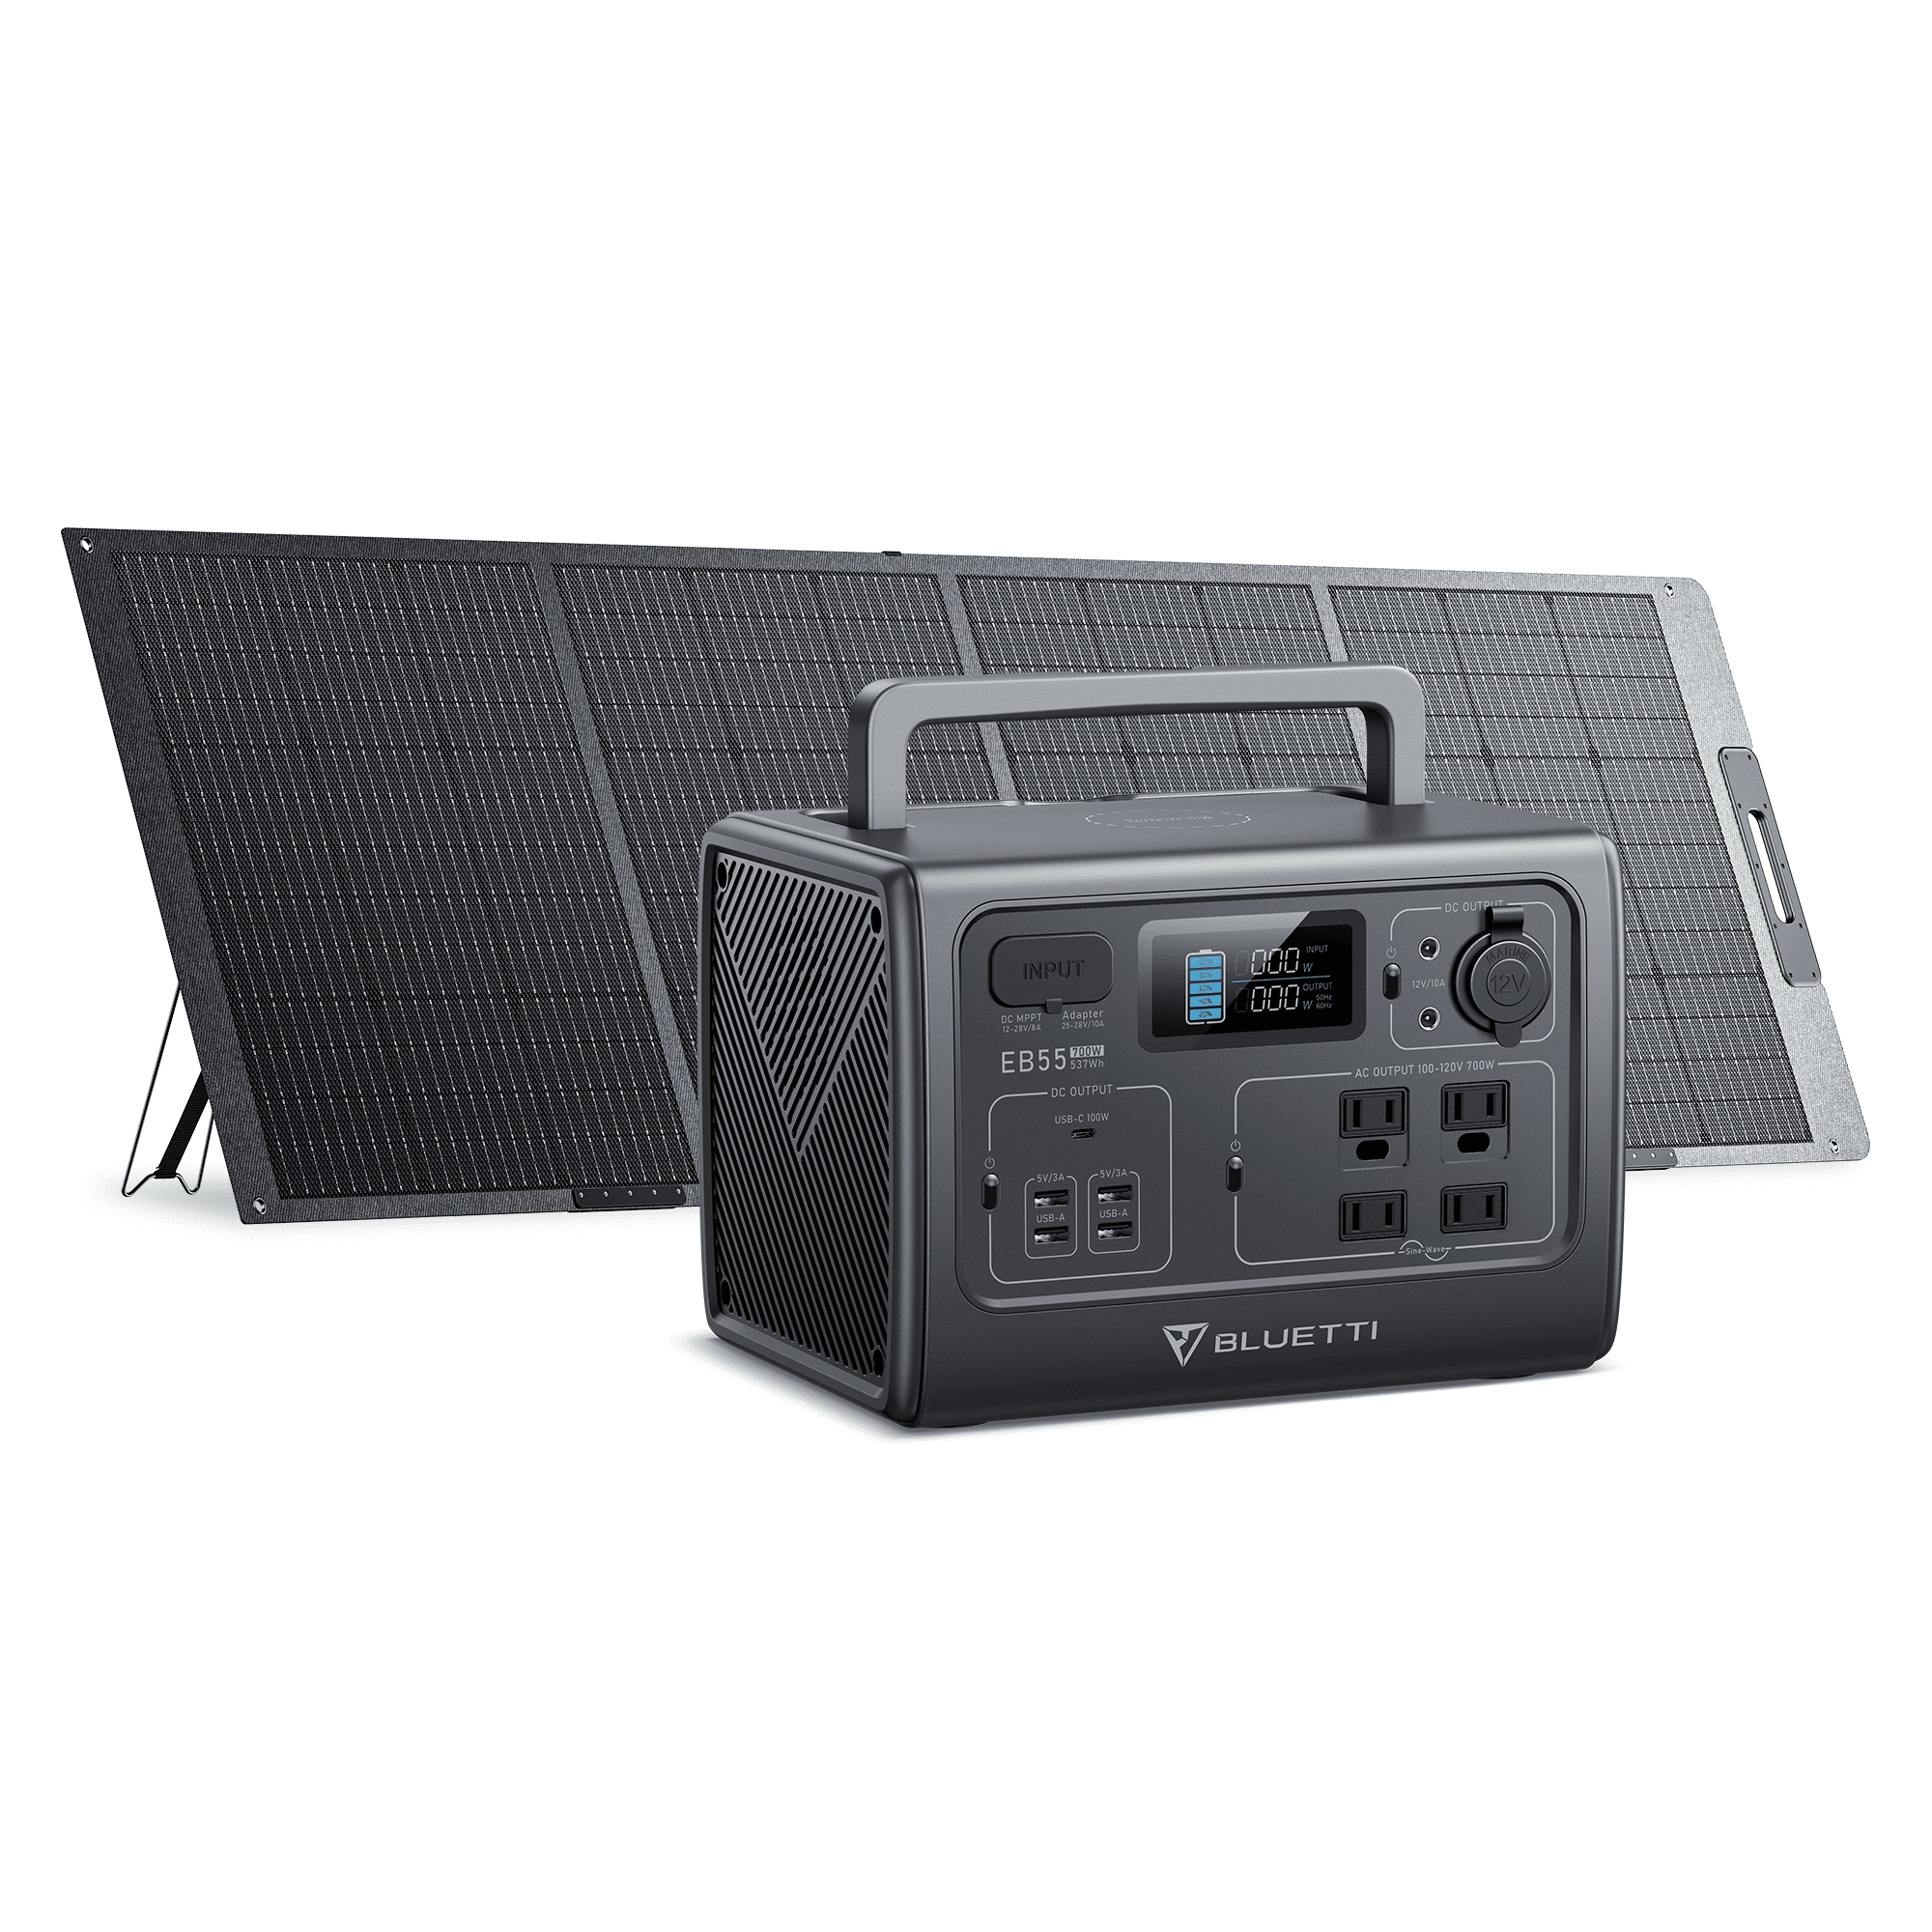 Bluetti Portable Power Station With 200W PV200S Solar Panel Included, EB55  537Wh Solar Generator W/ 4 110V/700W AC Outlets, LiFePO4 Battery Pack for  Camping, Adventure, Emergency 